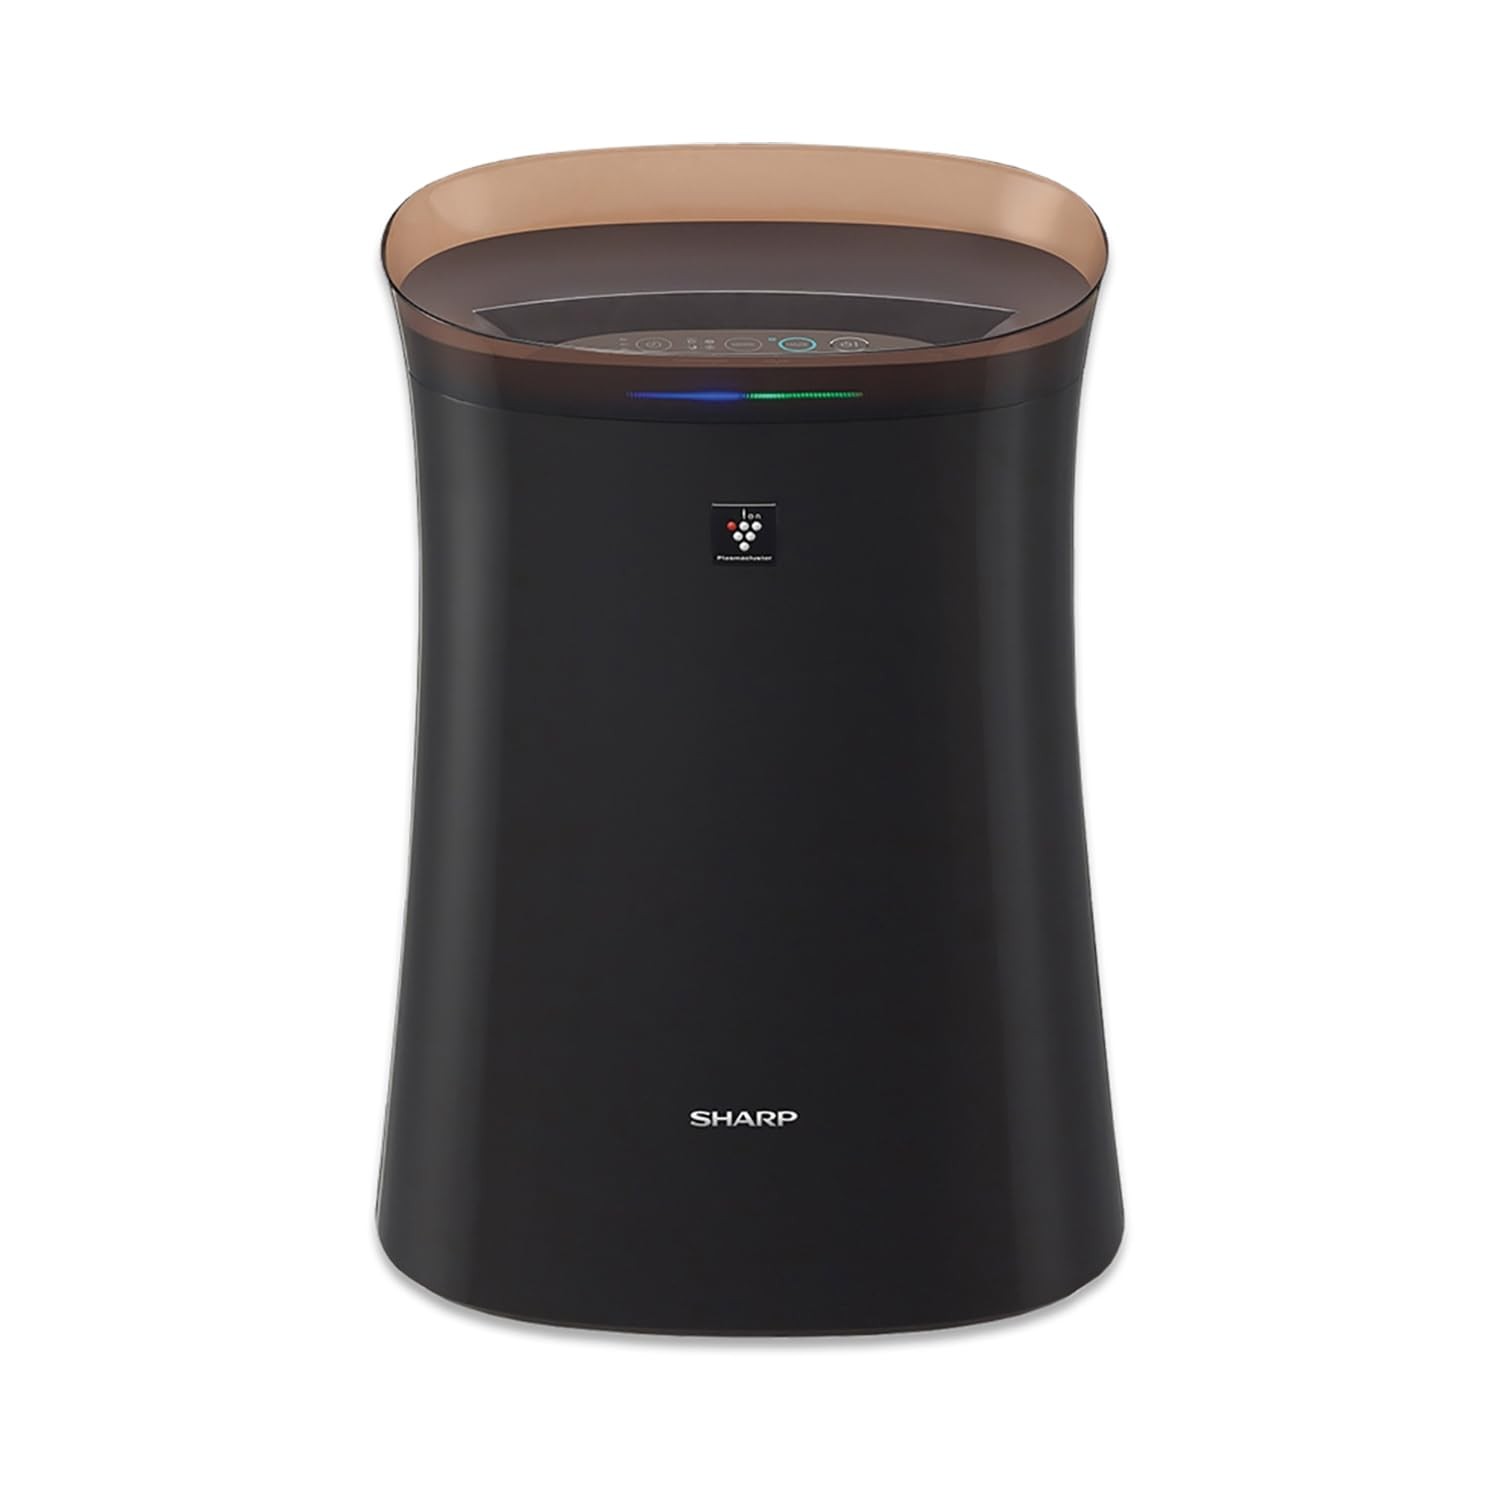 Sharp Air Purifier for Homes & Offices Dual Purification ACTIVE Plasmacluster Technology,PASSIVE FILTER(True HEPA+Carbon+Pre-Filter)Captures 99.97% of Impurities Model:FP-F40E-T Brown